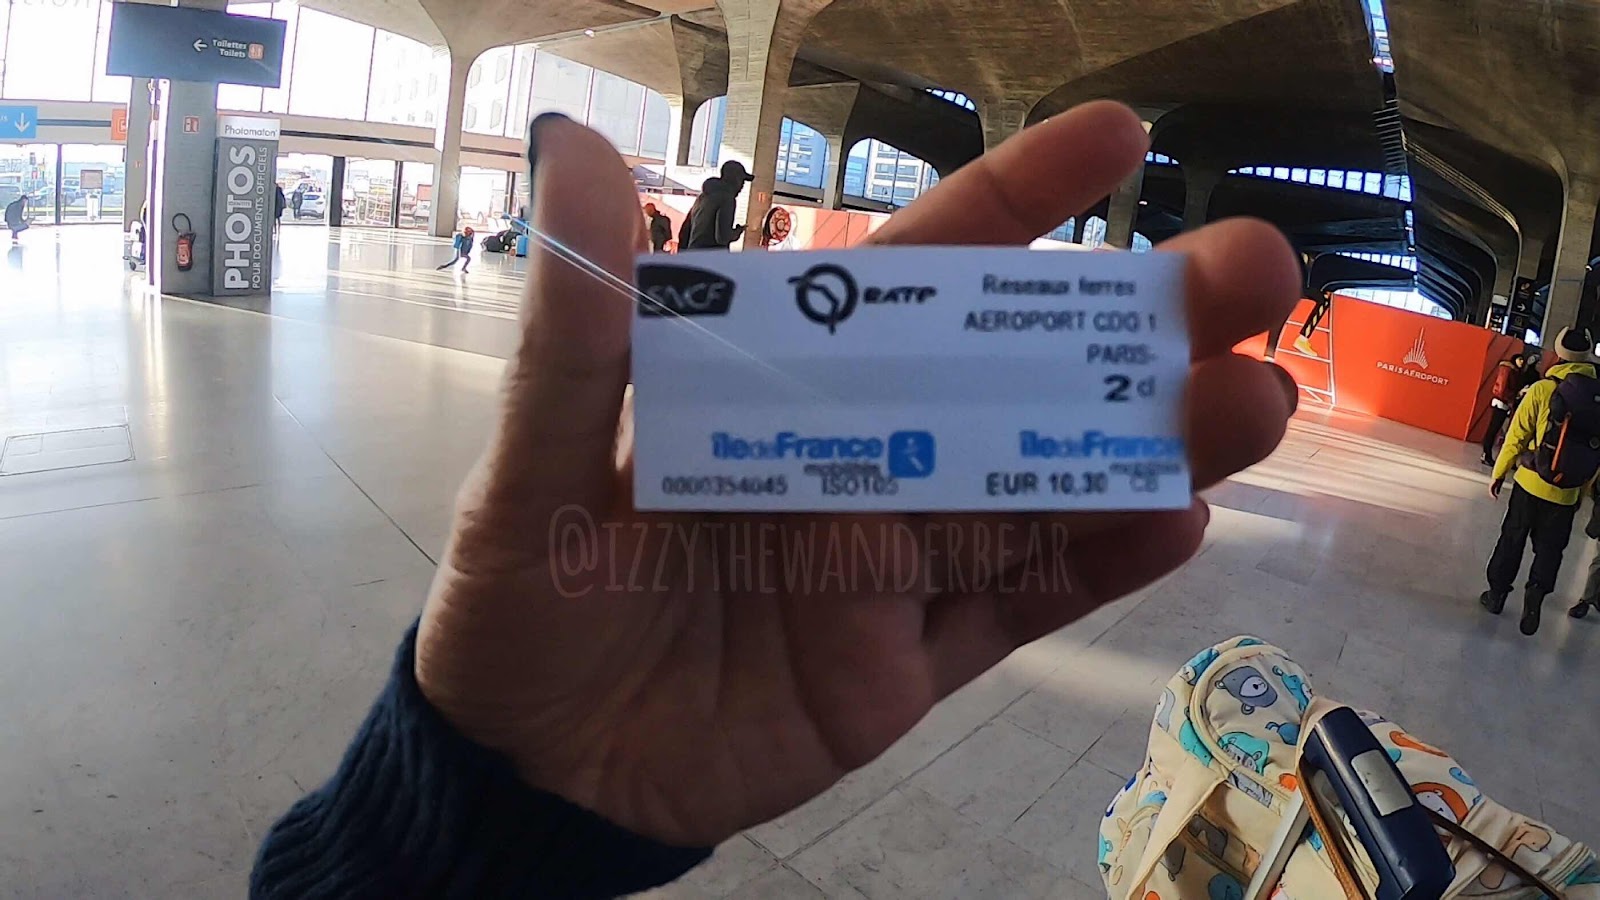 Izzy the Wander Bear - Train Ticket in Paris from The Airport